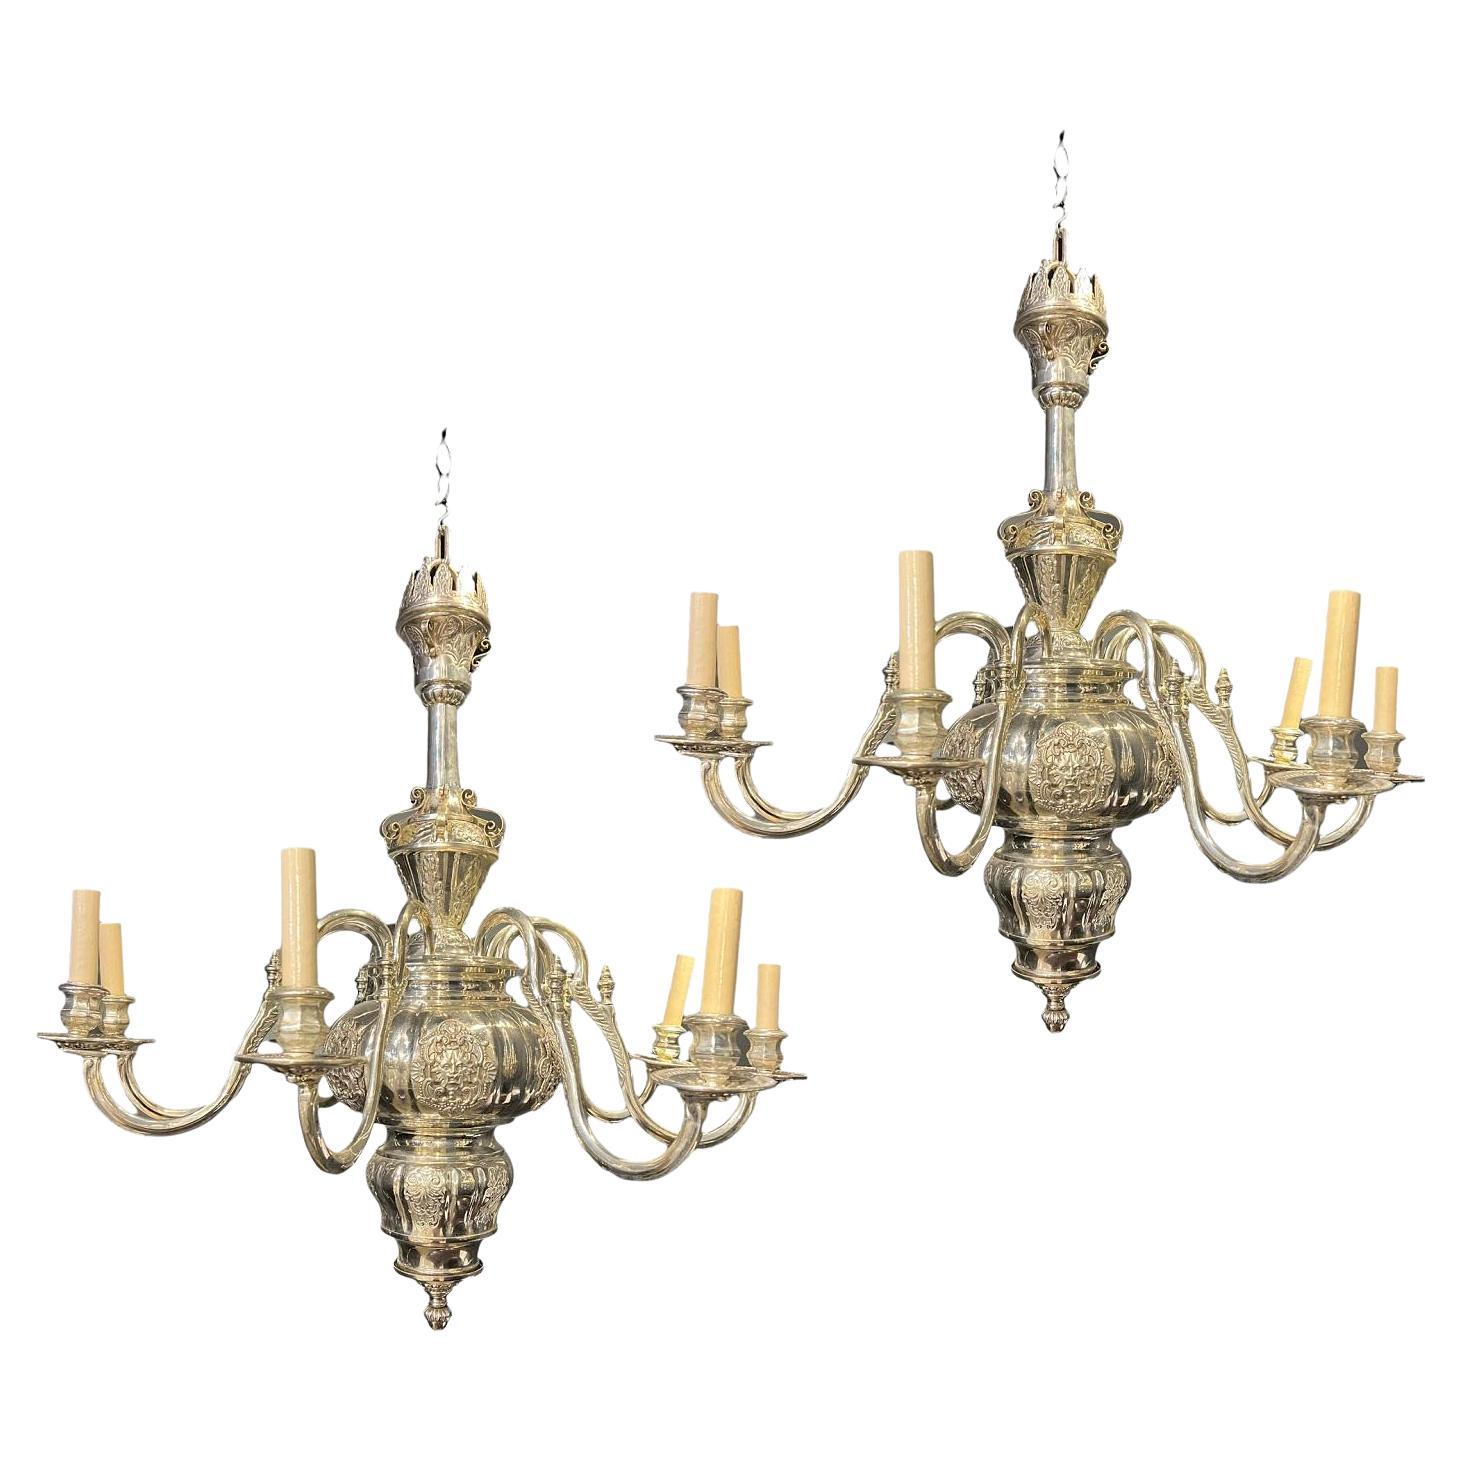 1920's Silver Plated Caldwell Chandeliers with 8 Lights For Sale